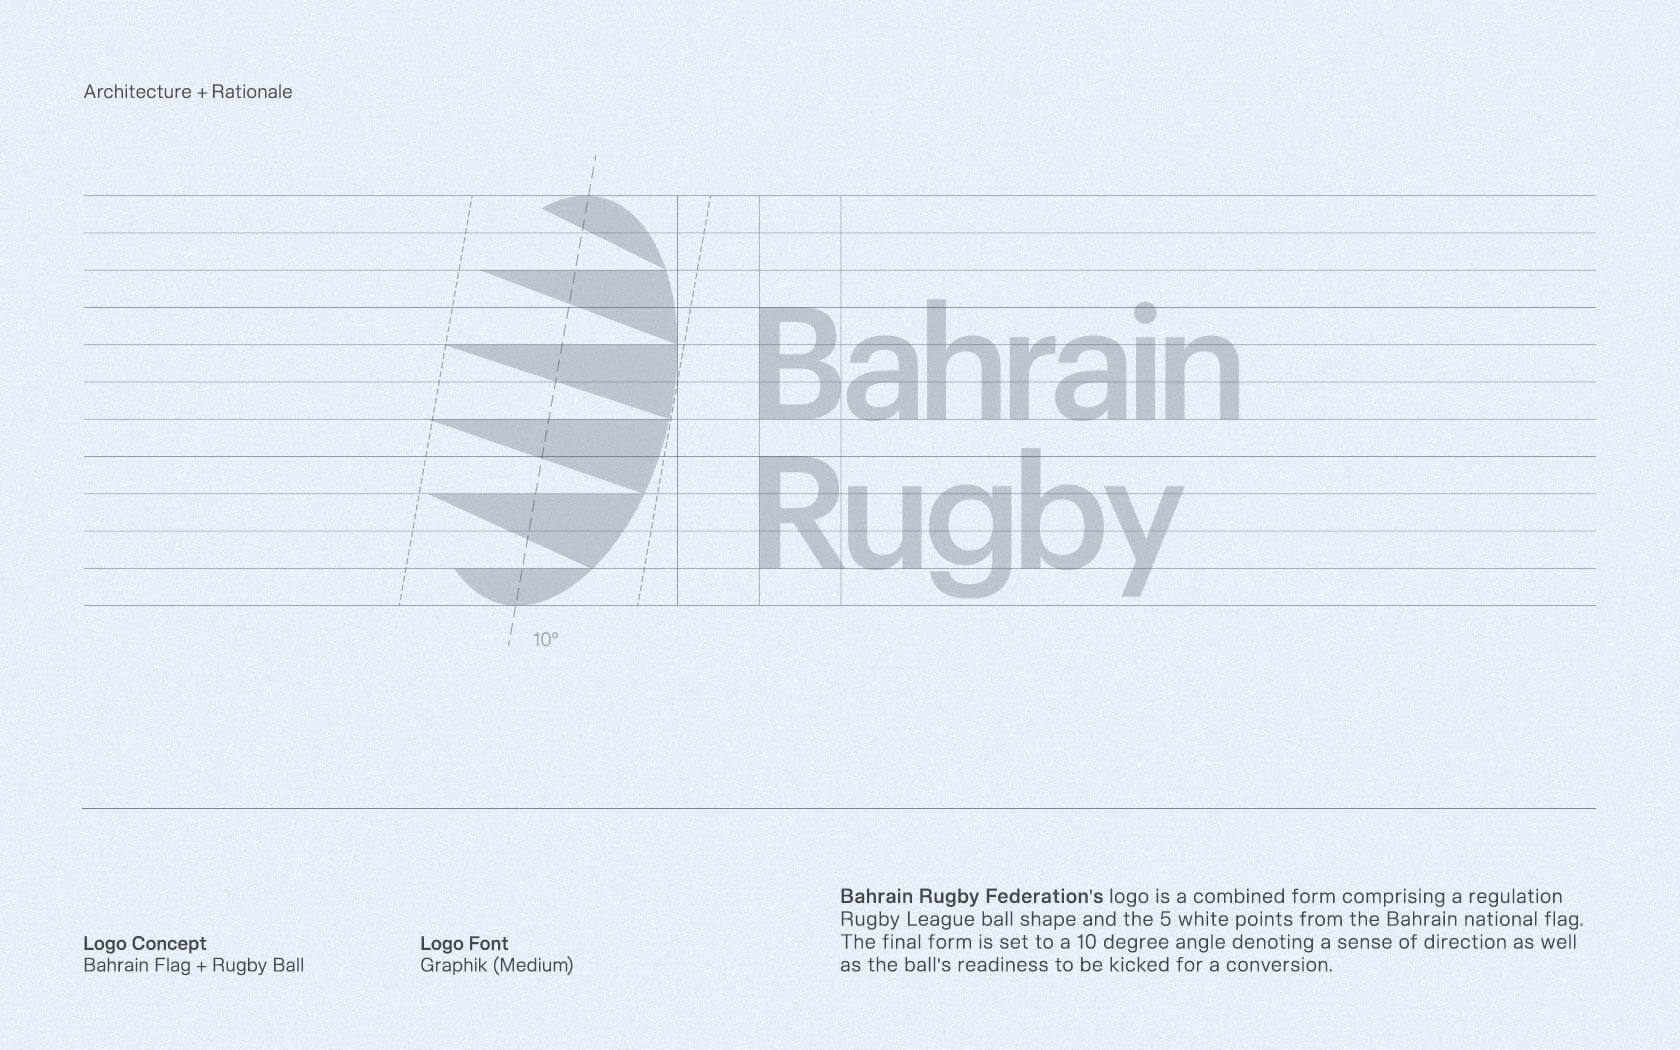 Bahrain Rugby. Architectural Grid